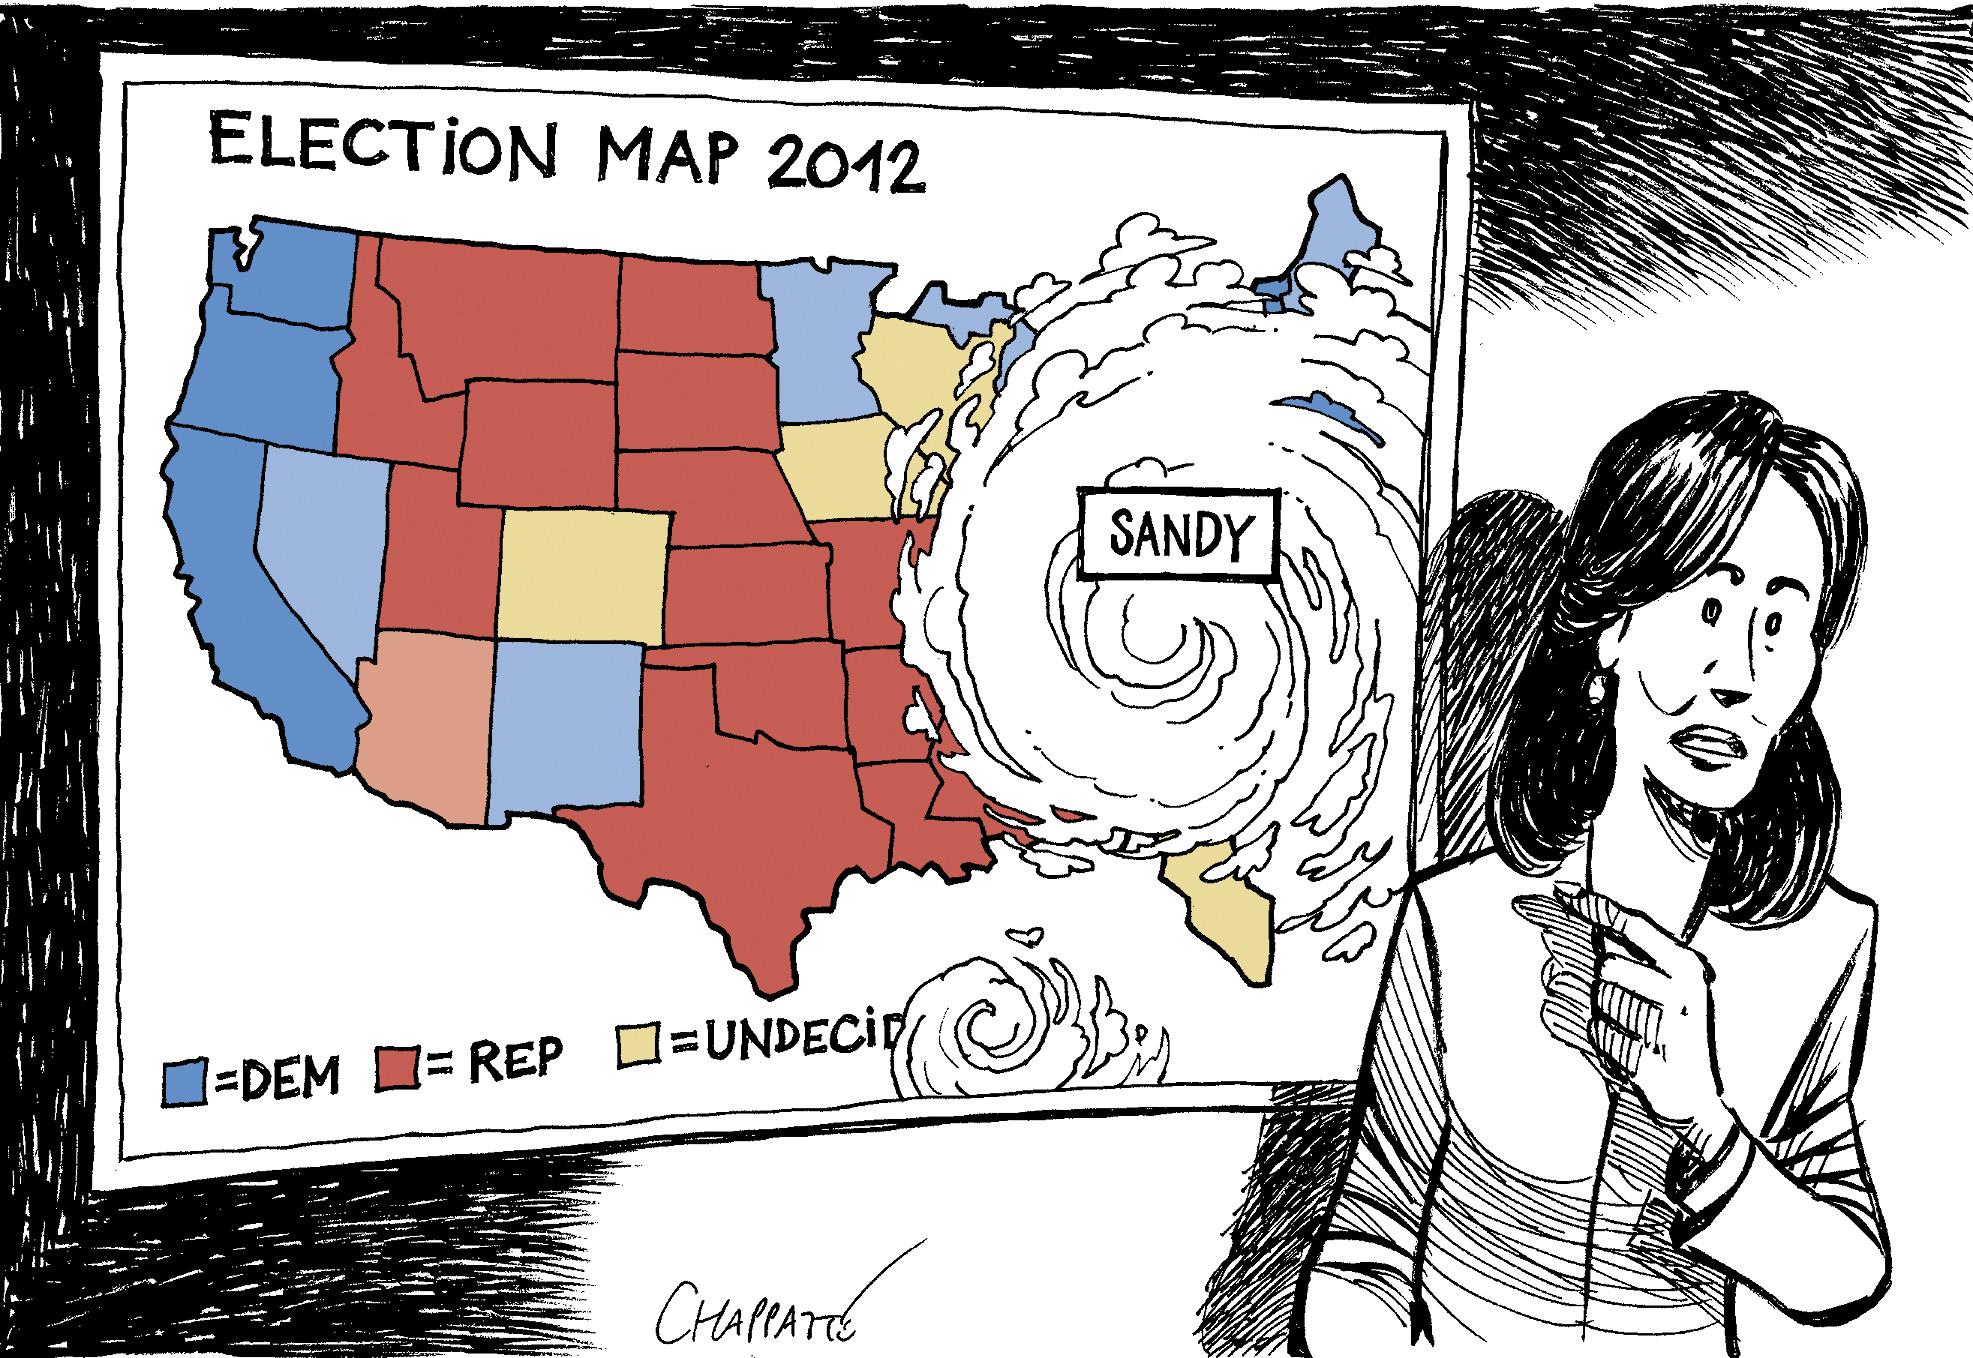 Storm Sandy Hits The Campaign